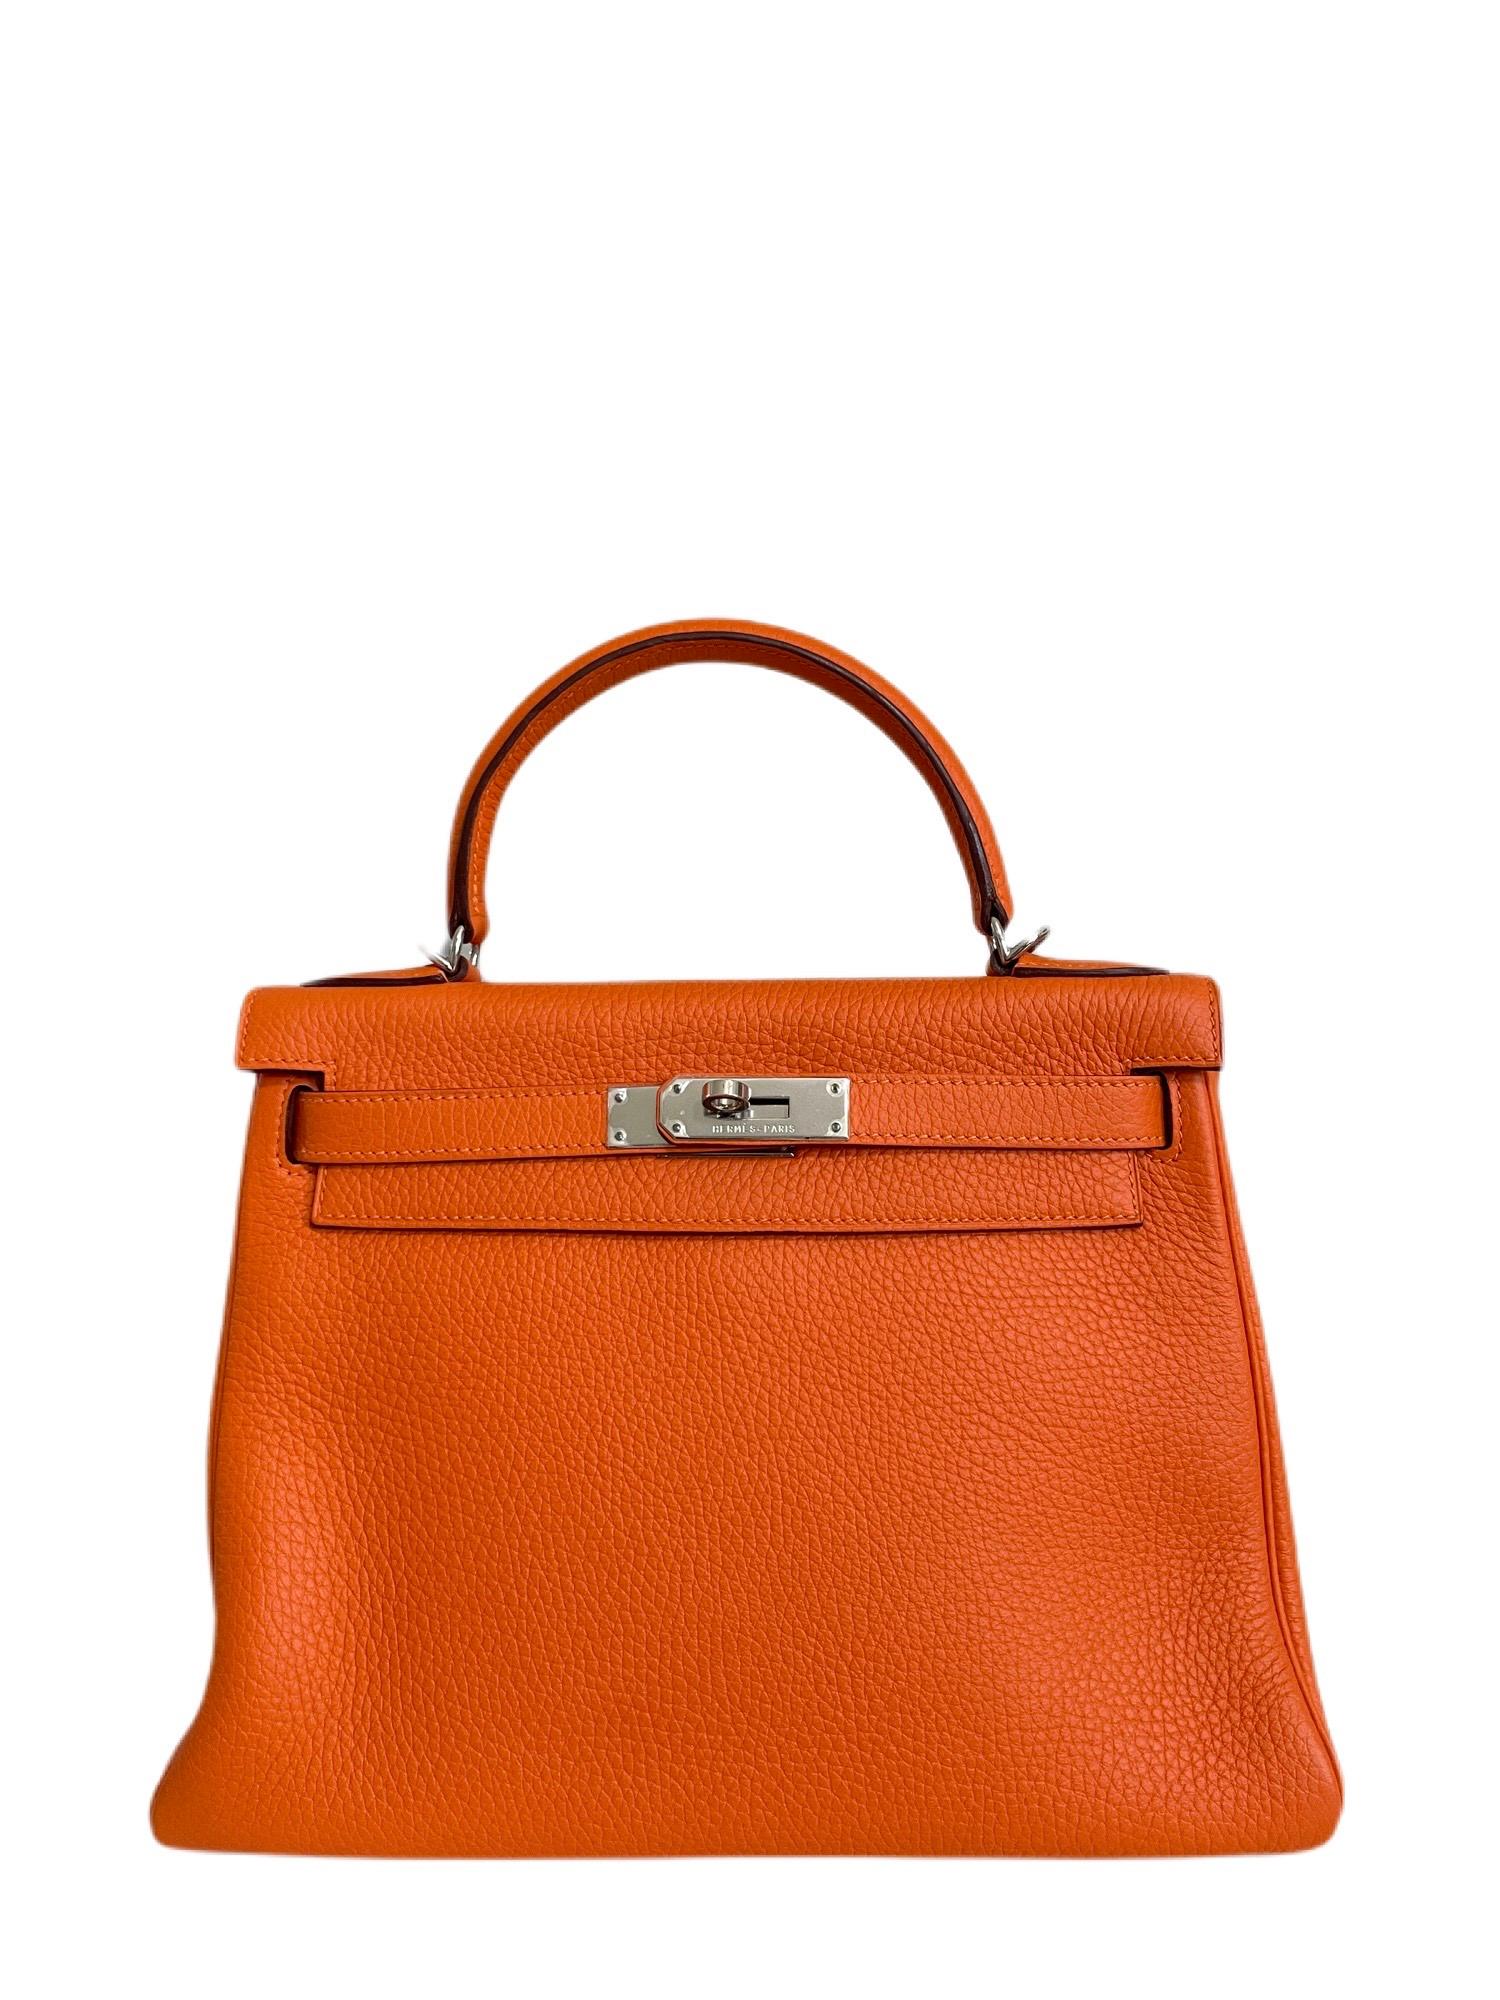 Hermes Kelly 28 Hermes Kelly 28 Orange Togo Leather Palladium Hardware. Pristine Condition, Plastic on hardware, Perfect corners and structure. 

Shop with confidence from Lux Addicts. Authenticity guaranteed! 